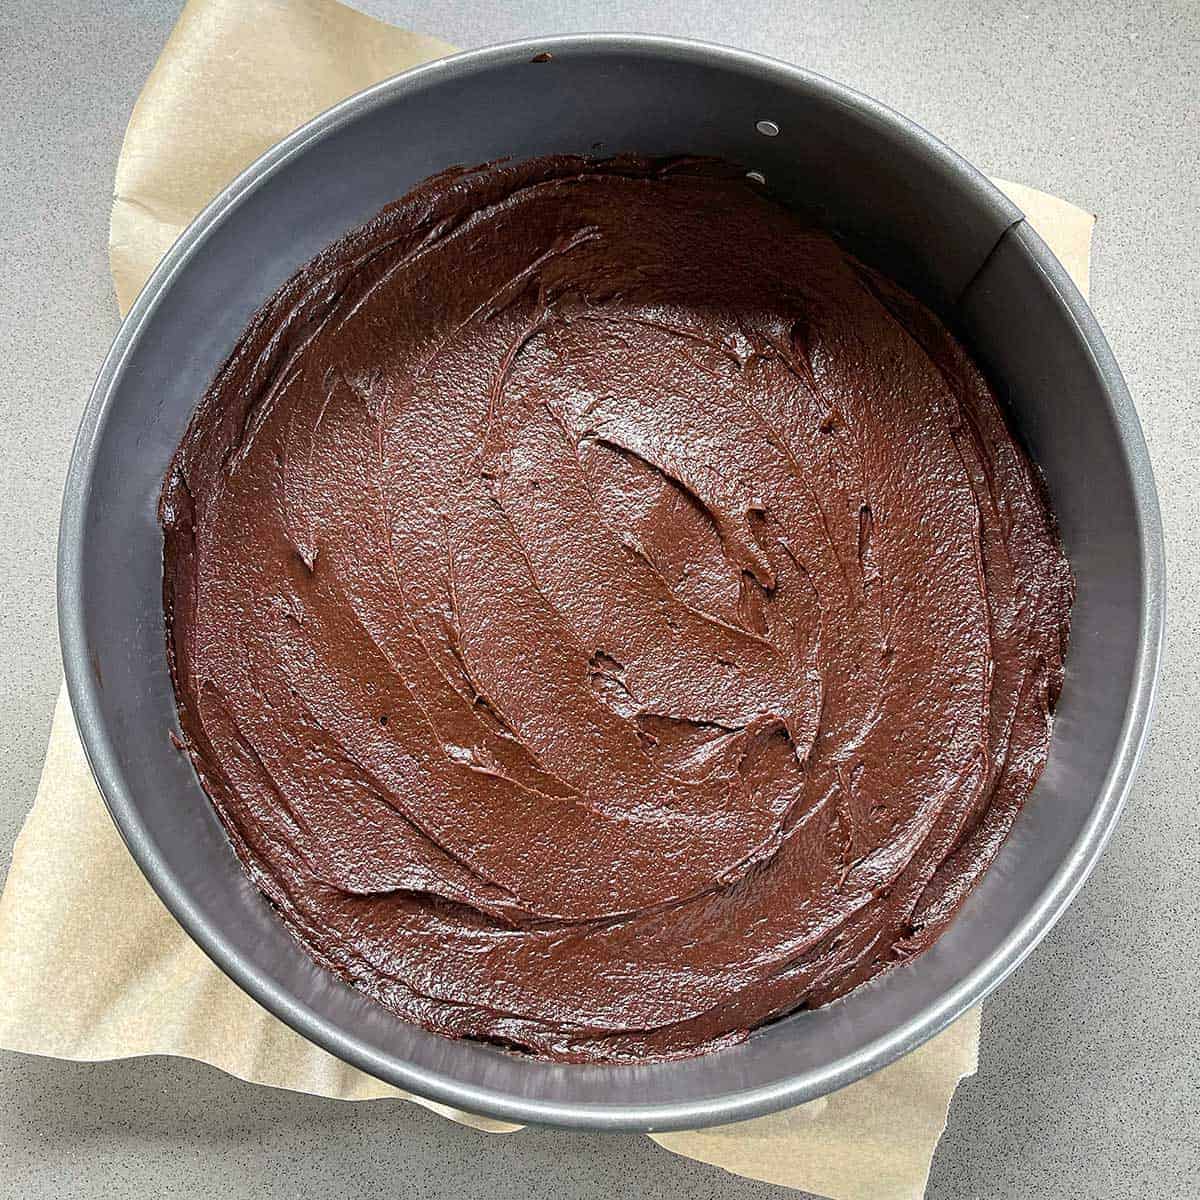 A cake tin with chocoalte cake batter sitting on a grey bench.